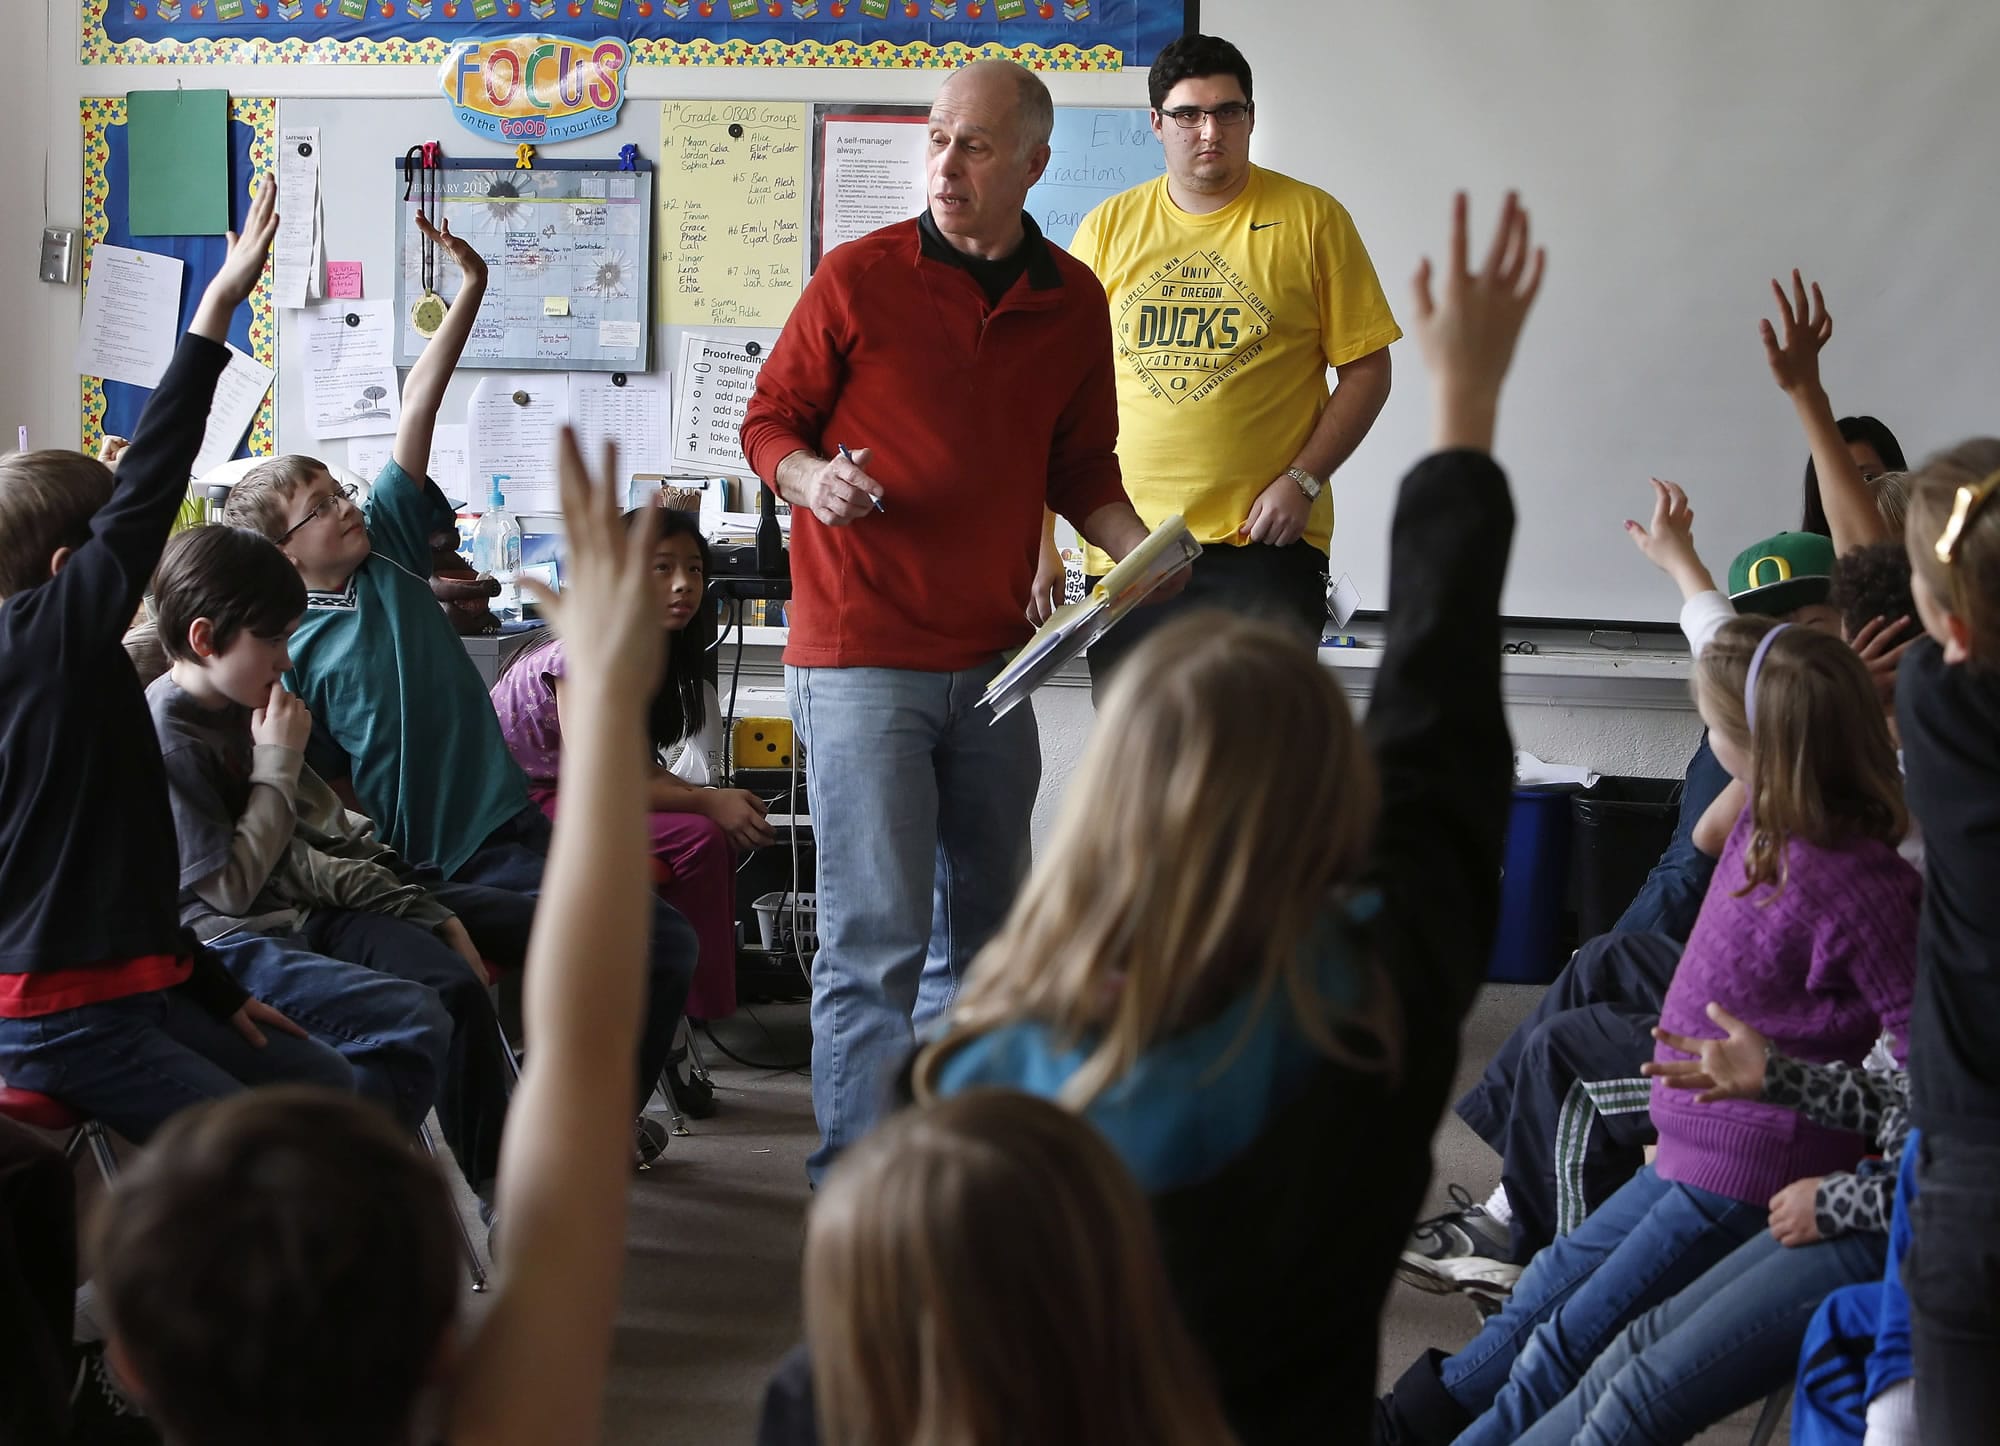 University of Oregon philosophy instructor Paul Bodin and UO student Kevin Keiter engage a fourth-grade class at Edison Elementary School in a philosophy discussion in Eugene, Ore.